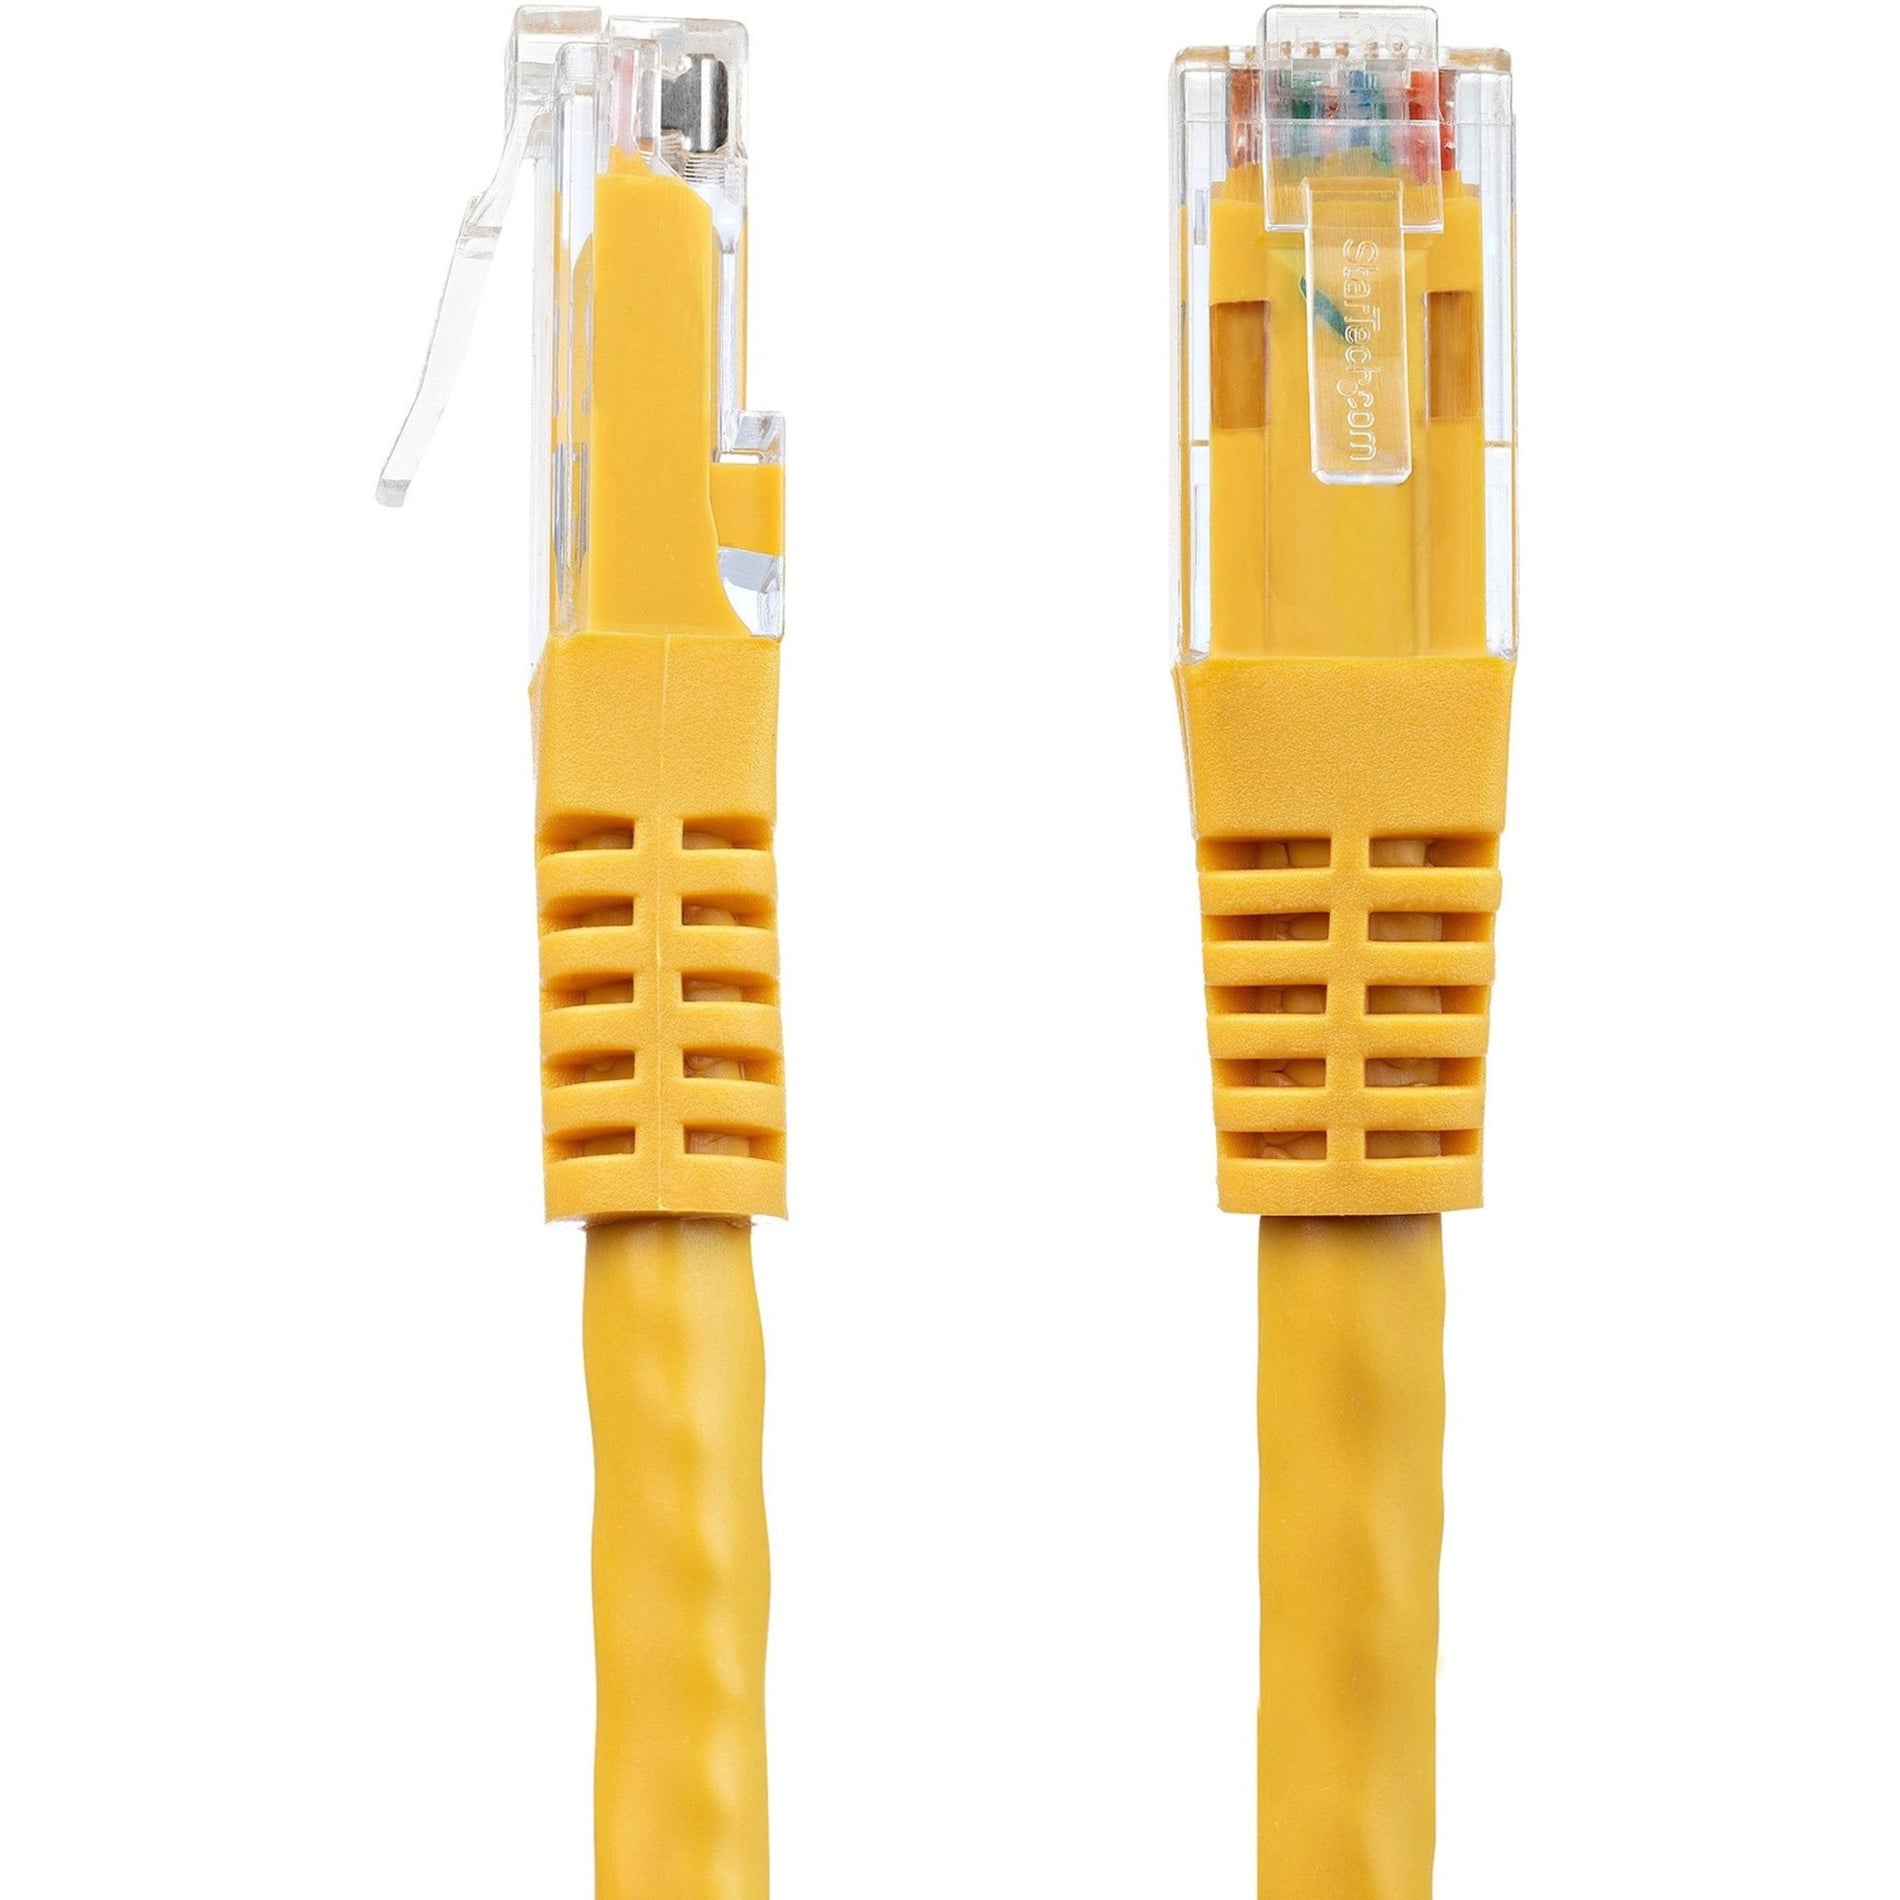 StarTech.com C6PATCH50YL 50ft Yellow Cat6 UTP Patch Cable ETL Verified, Corrosion Resistant, PoE++, Stranded, Bend Resistant, Strain Relief, Damage Resistant, Molded, PoE